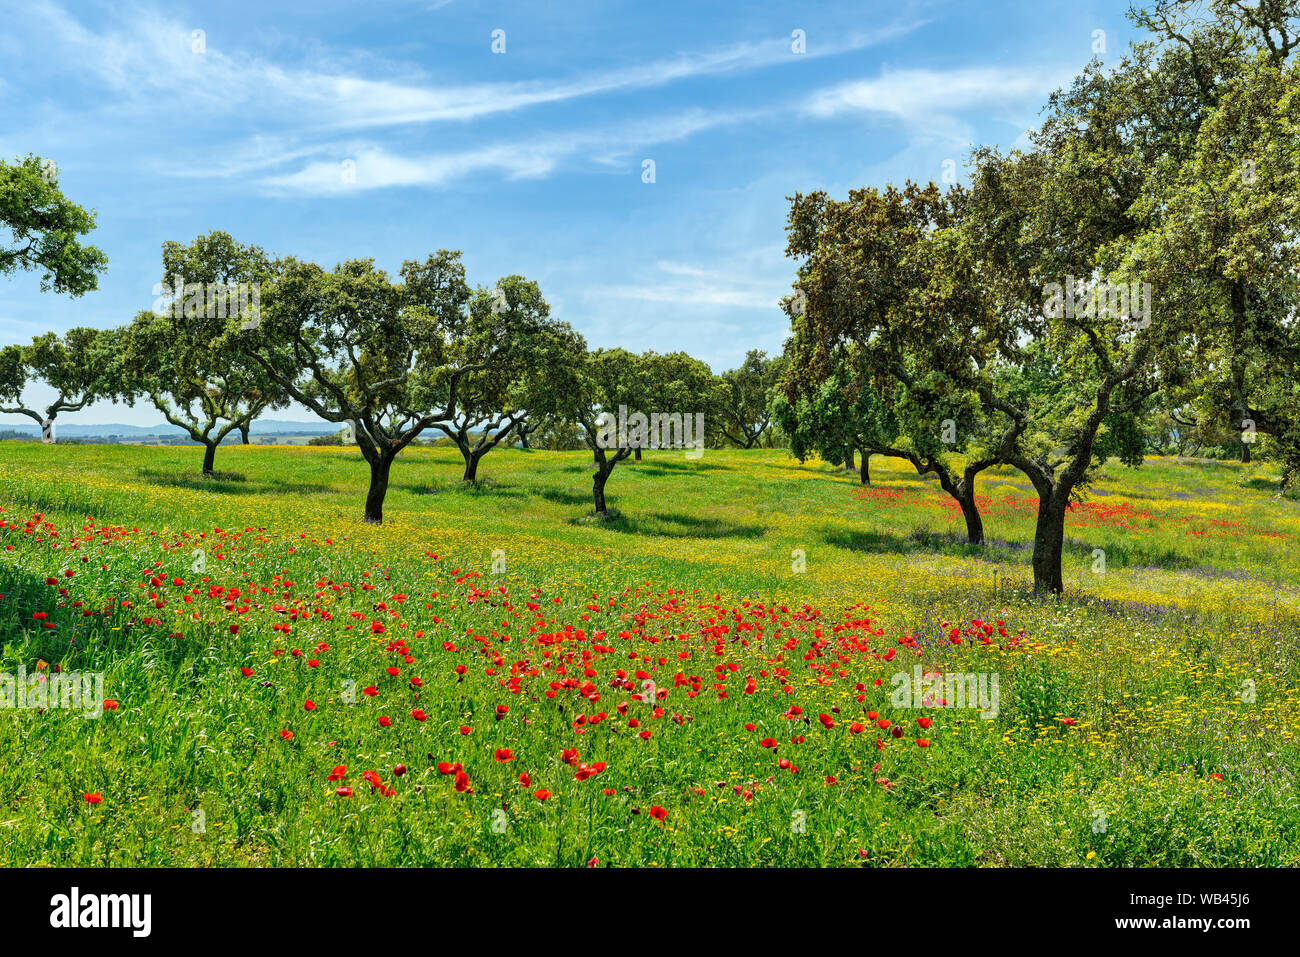 Alentejo meadow with wild flowers and cork trees Stock Photo